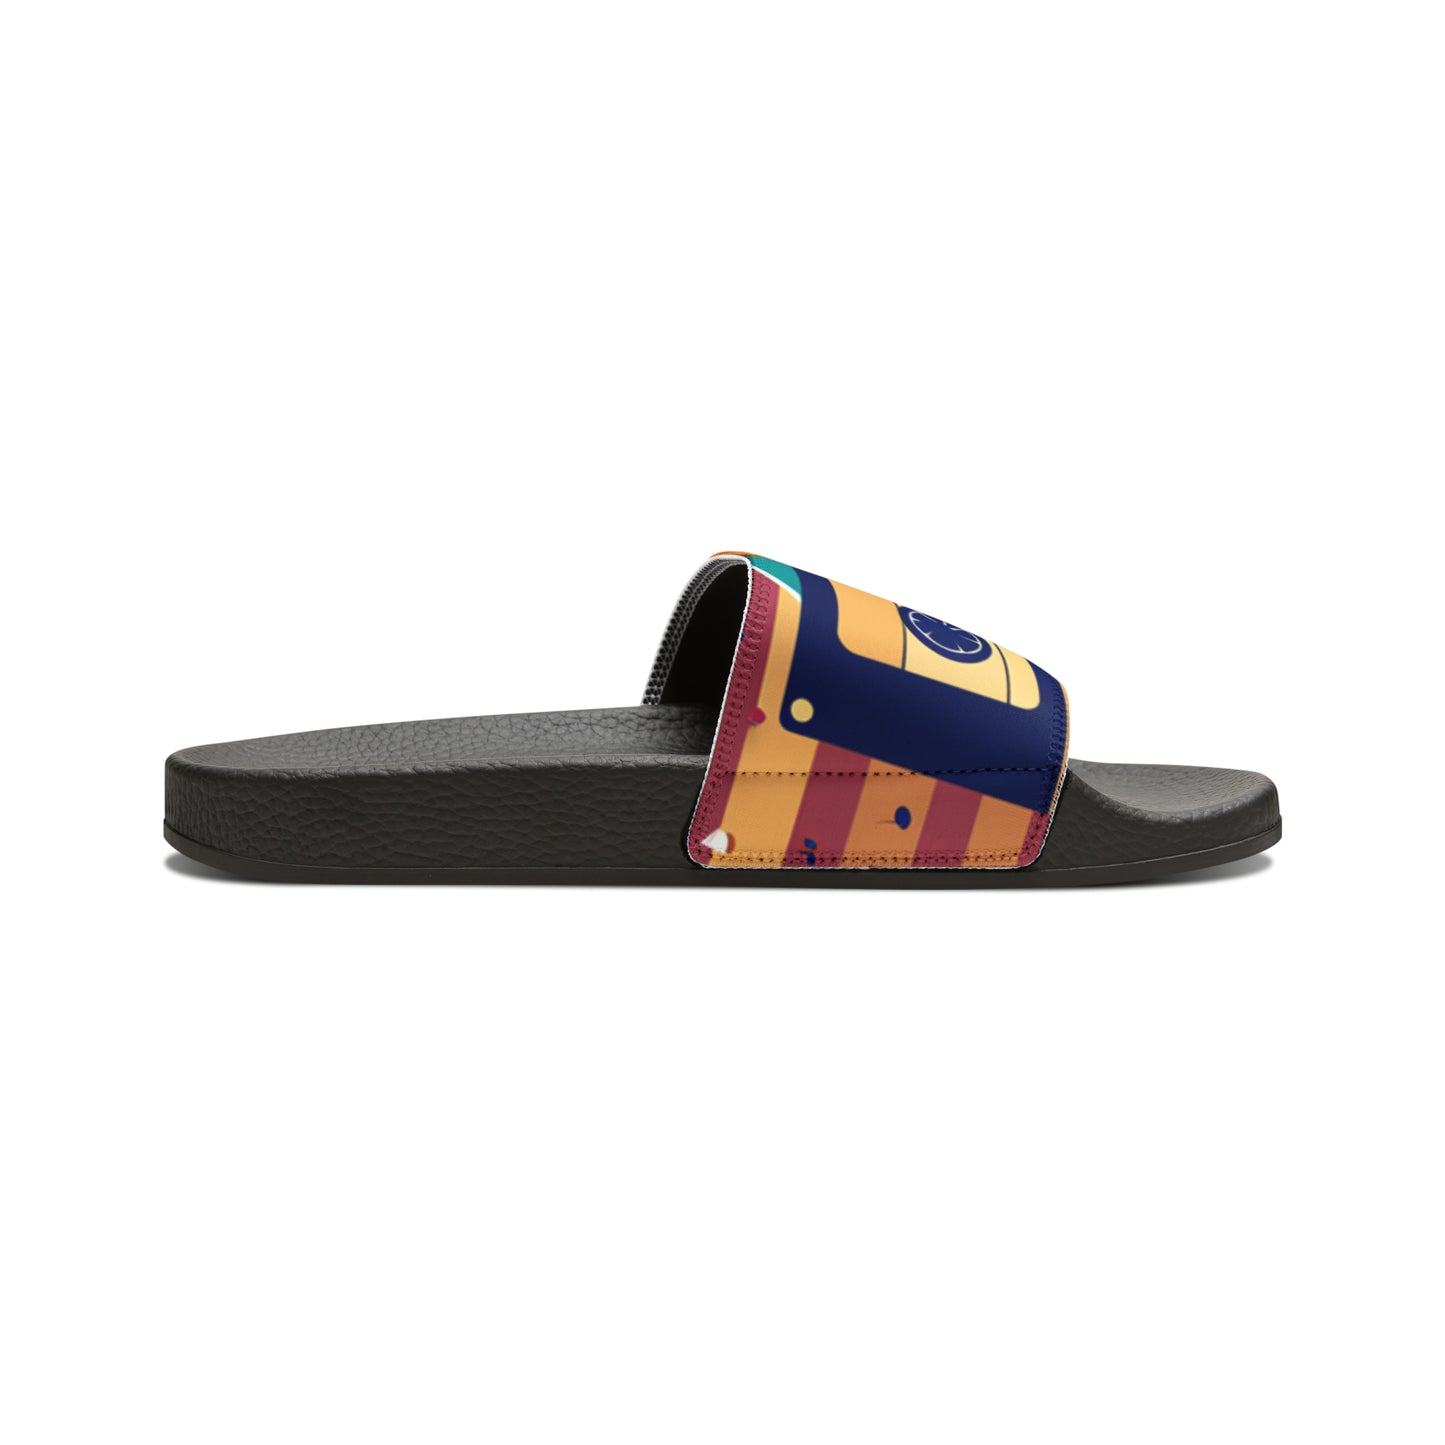 Let the Music Play Slide Sandals